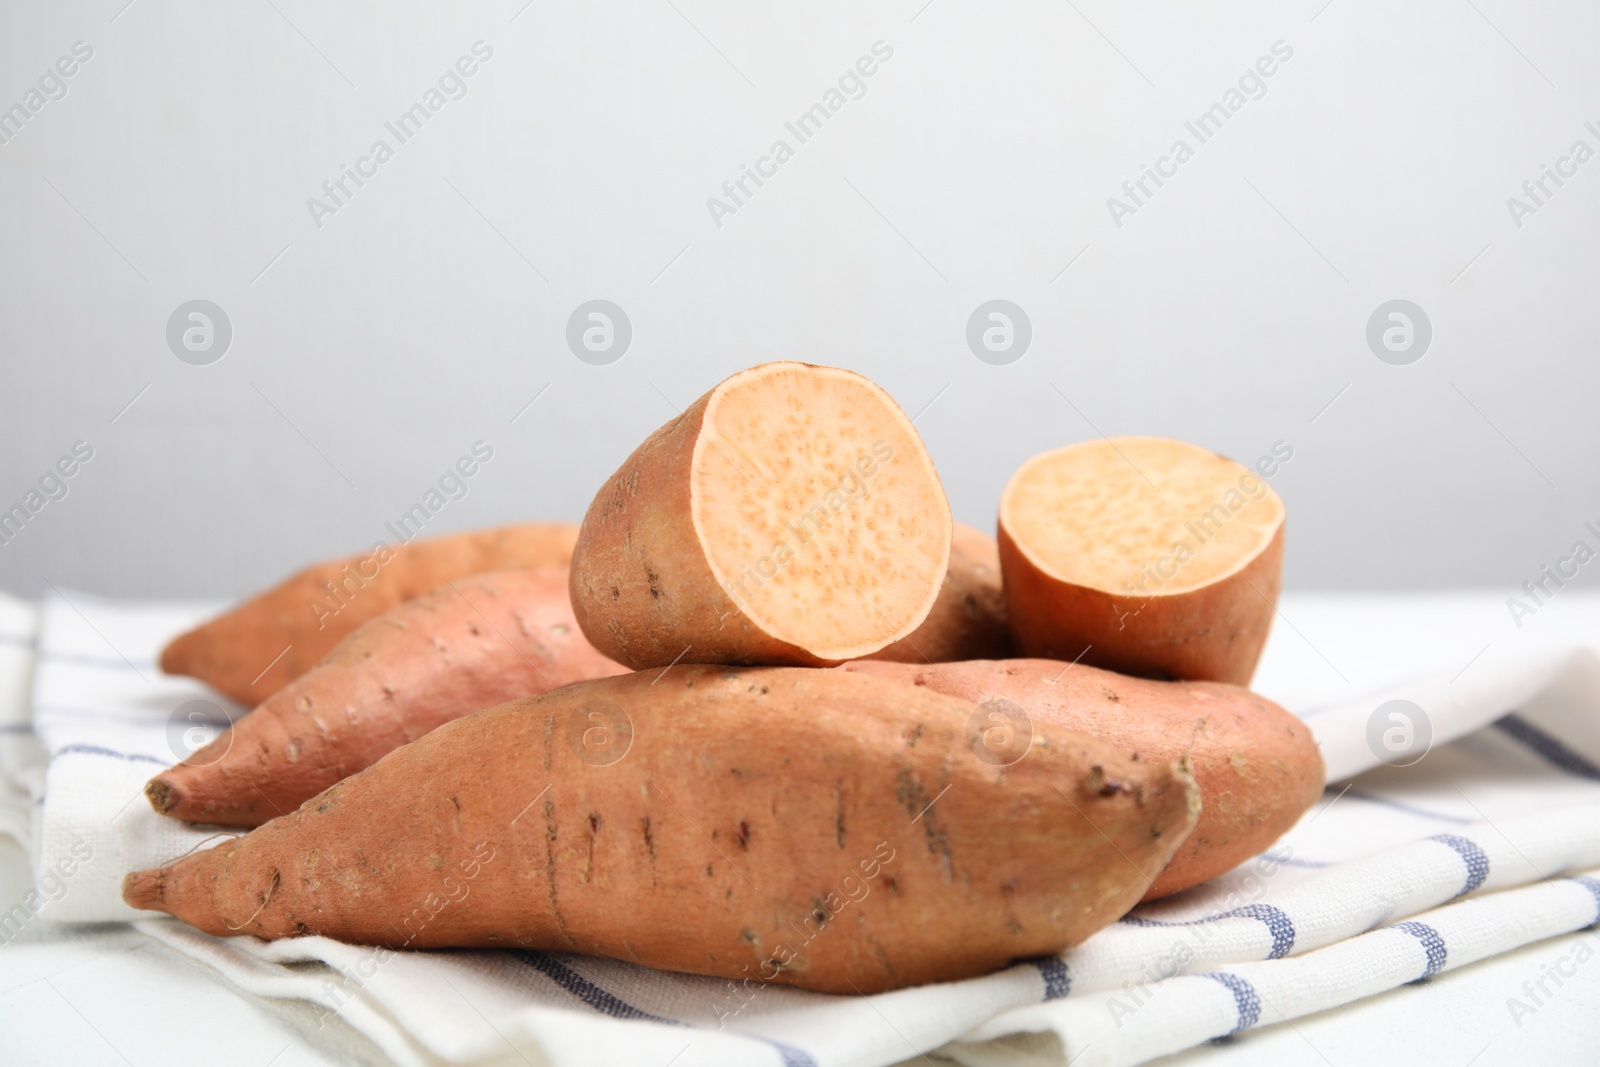 Photo of Whole and cut ripe sweet potatoes on kitchen towel